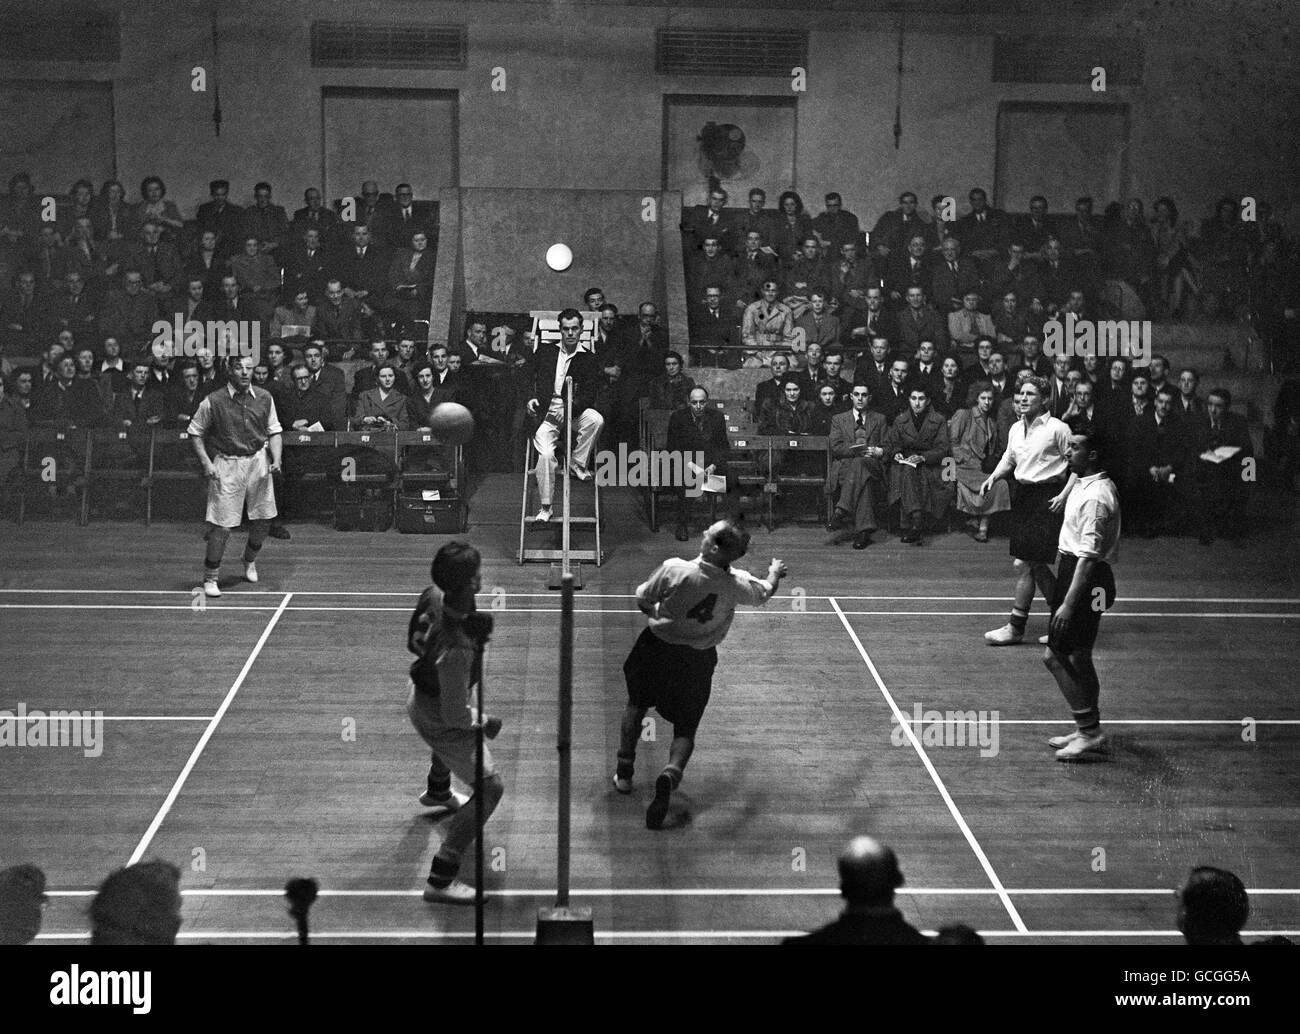 A general view of the 'Head Tennis' contest between Arsenal and Charlton (white shirts) Stock Photo